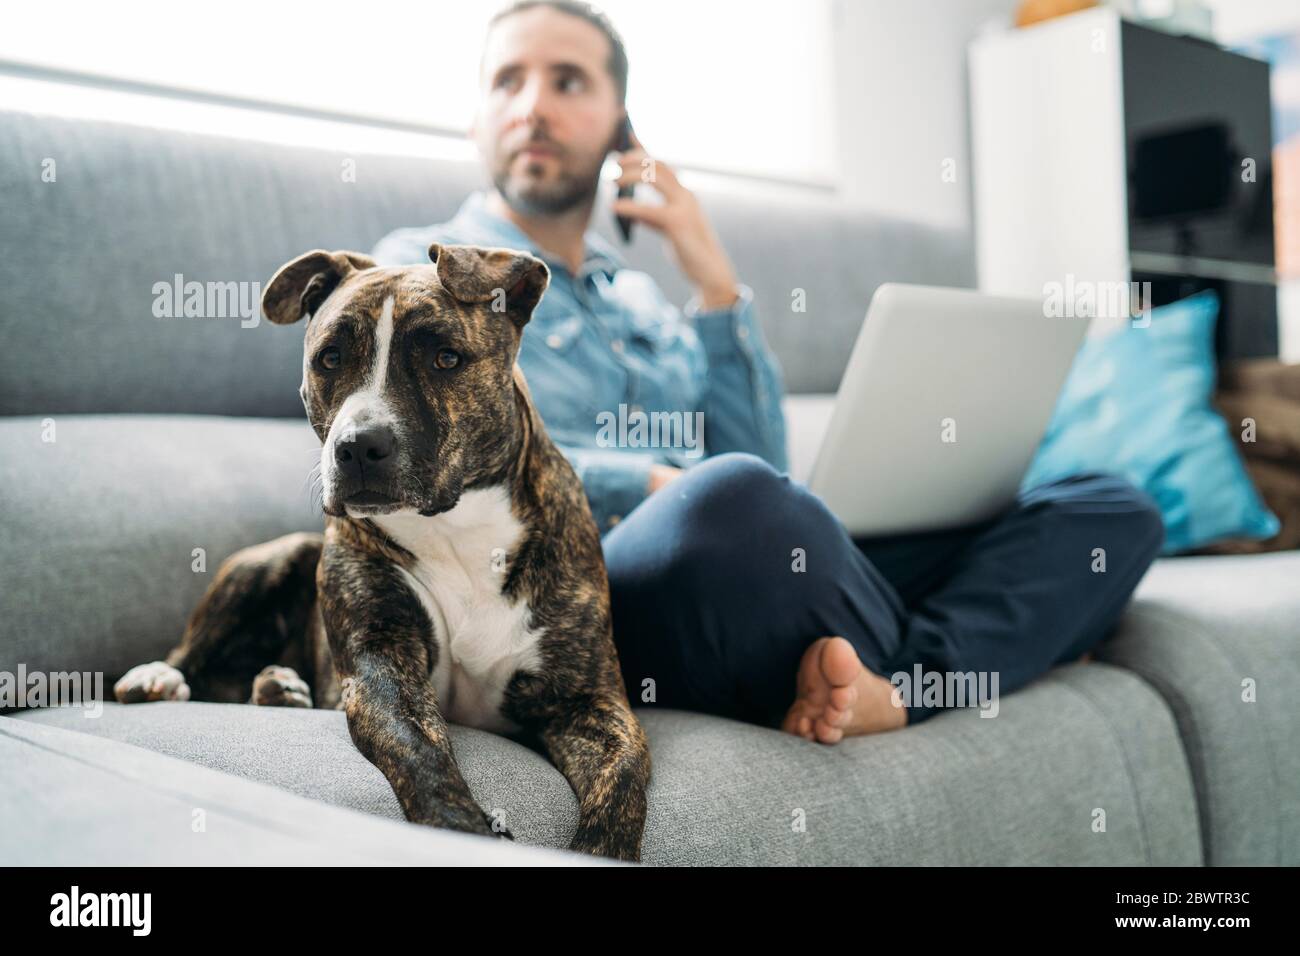 Dog sitting by businessman working from home during coronavirus pandemic outbreak, Almeria, Spain, Europe Stock Photo